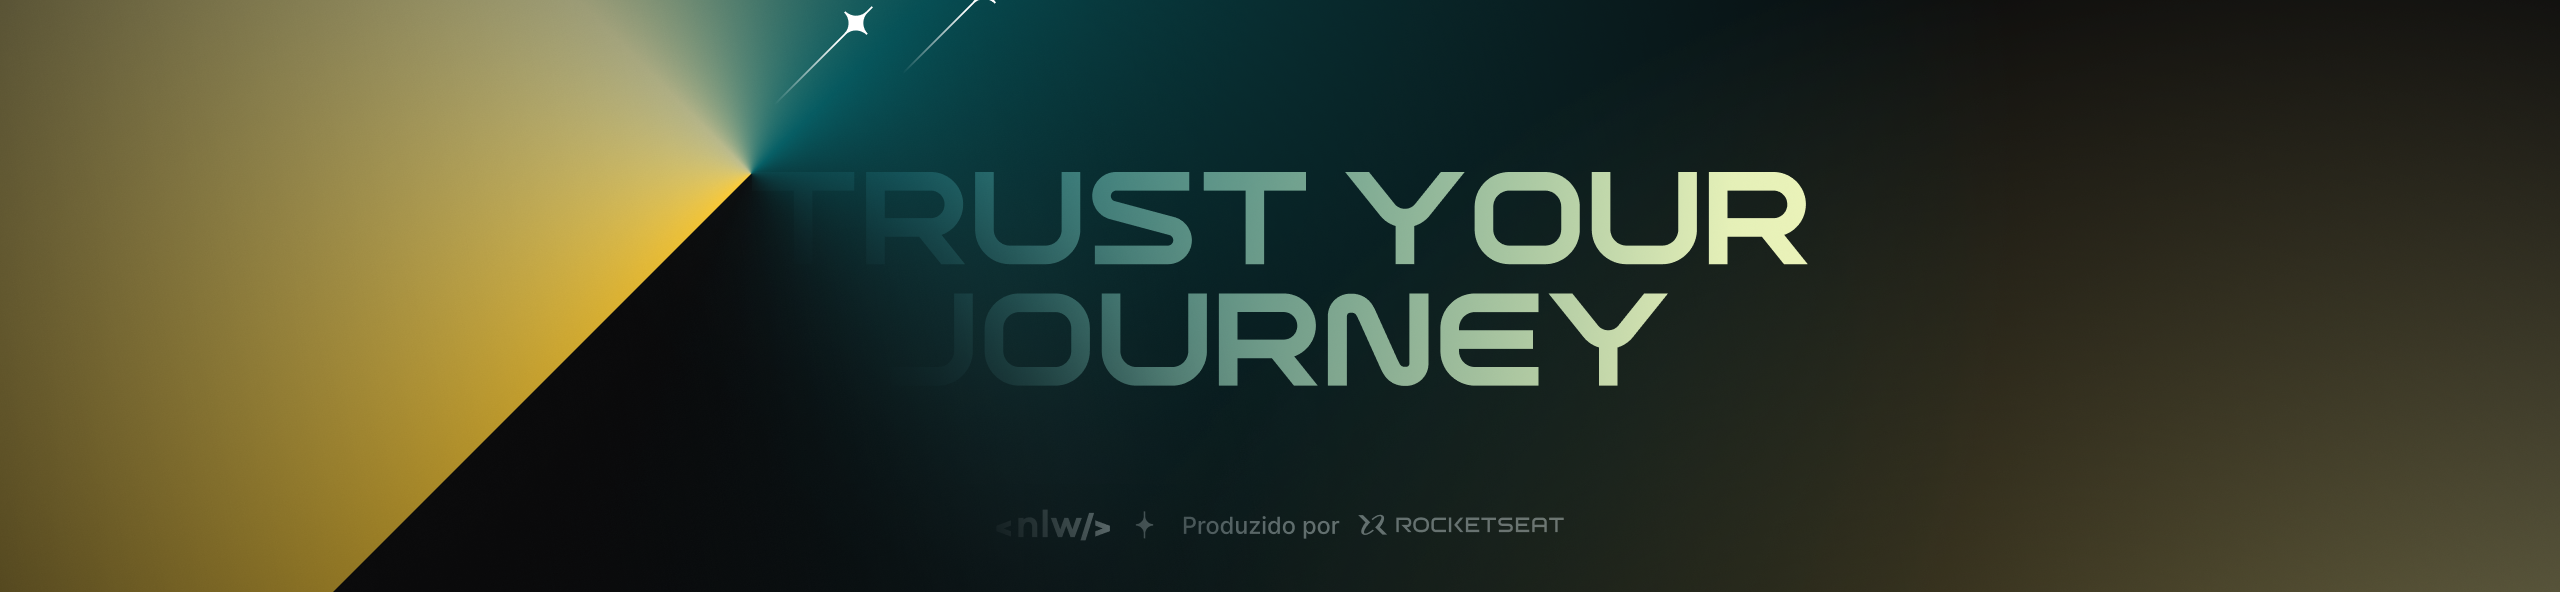 project-banner